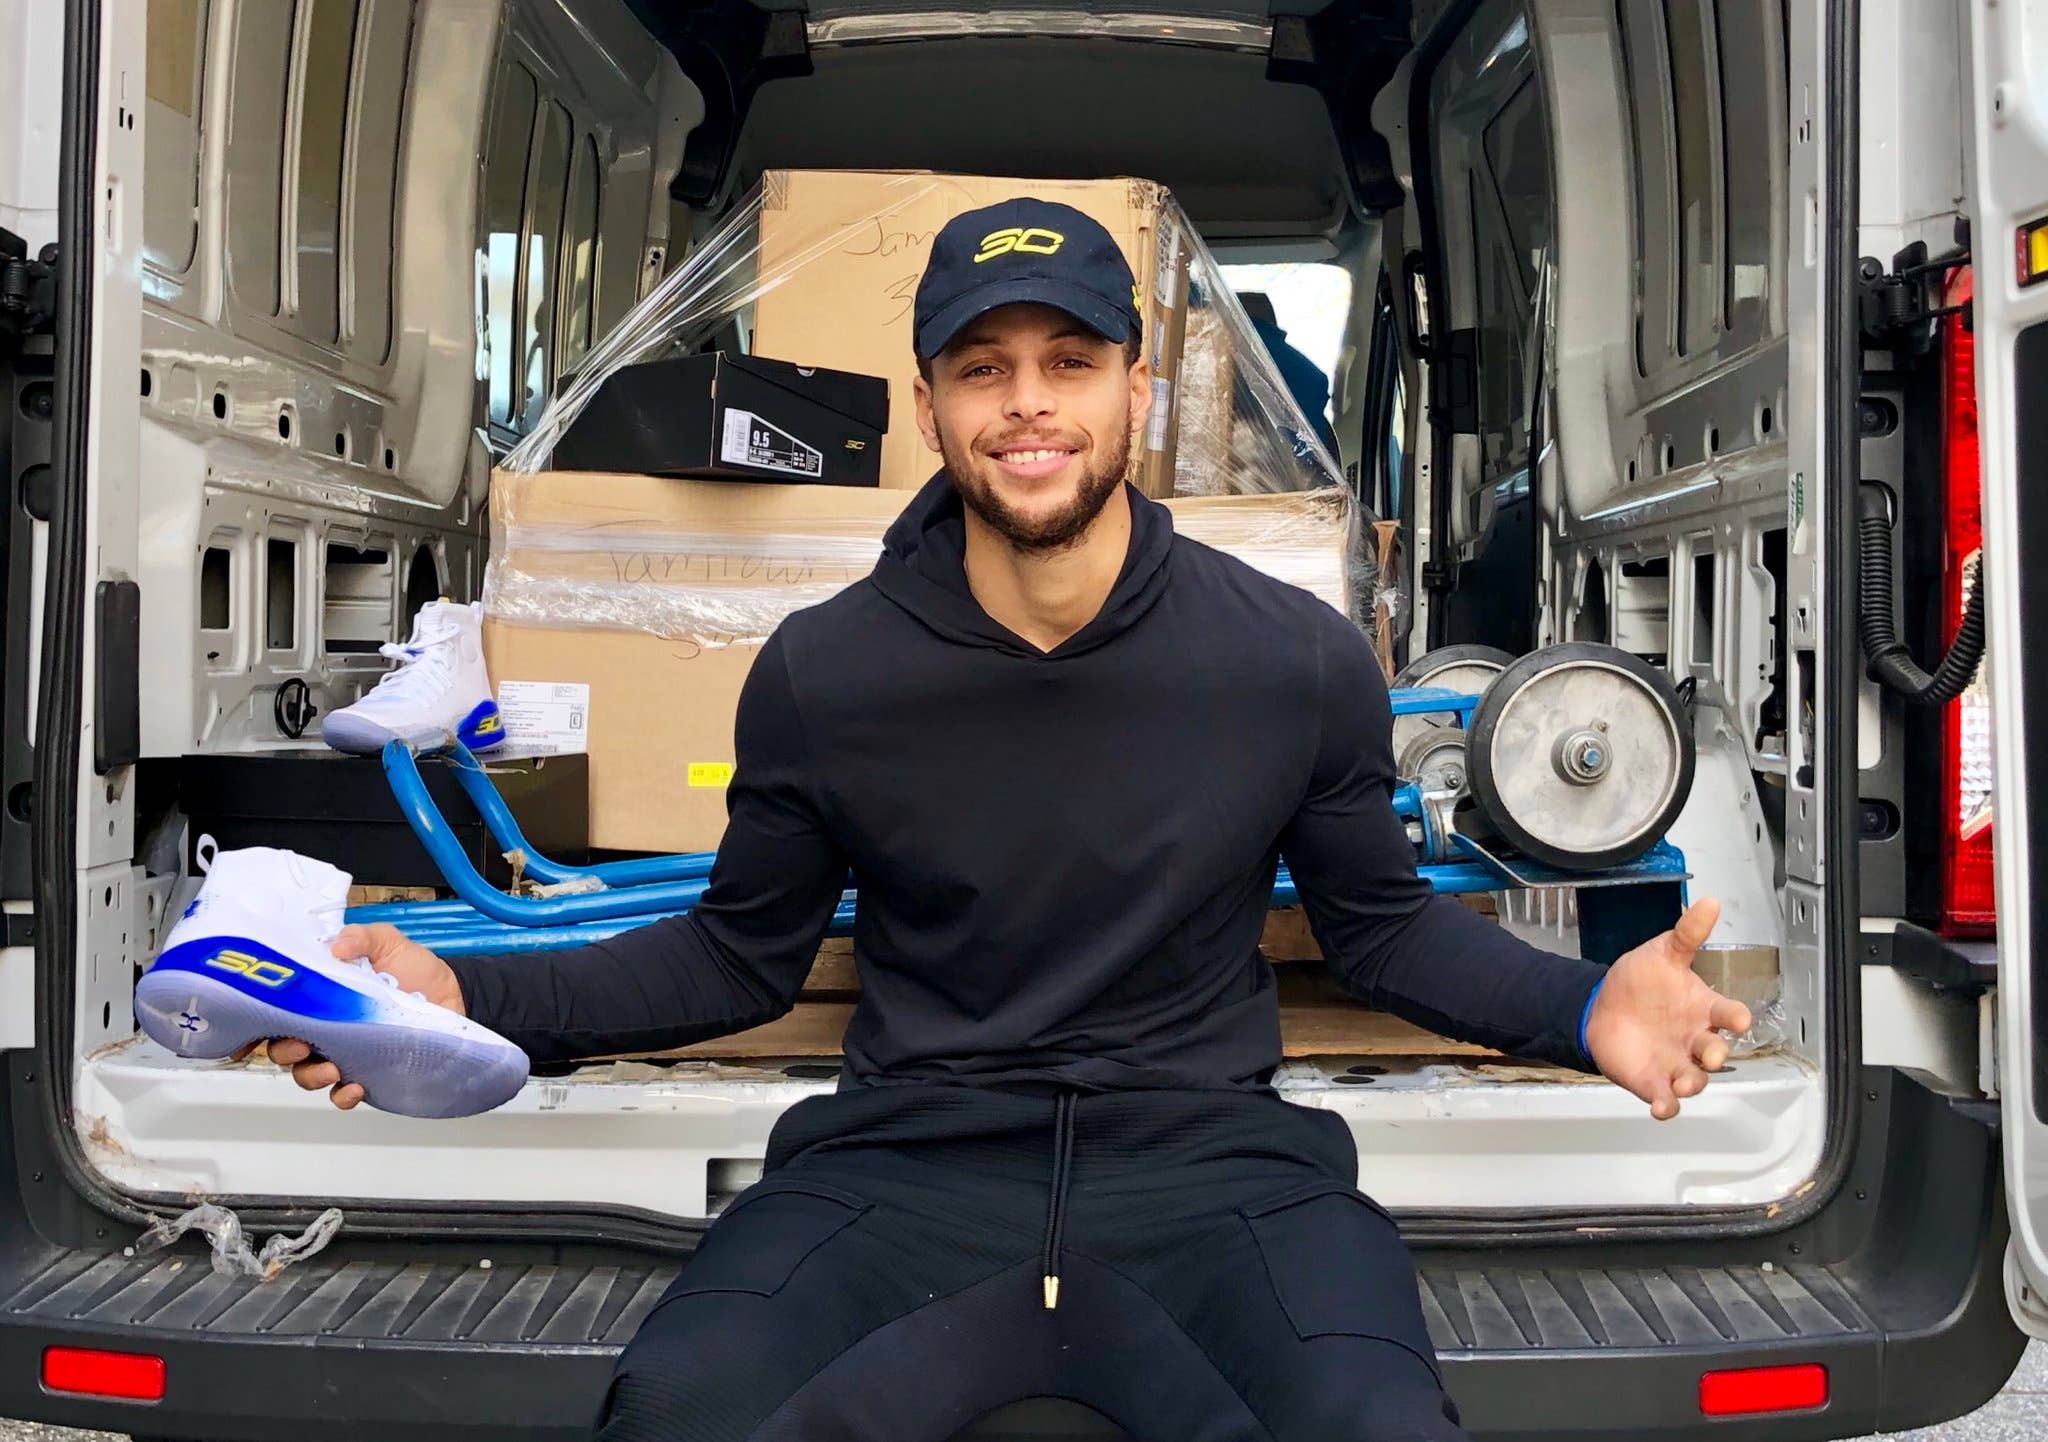 Stephen Curry Giving Away Curry 4s